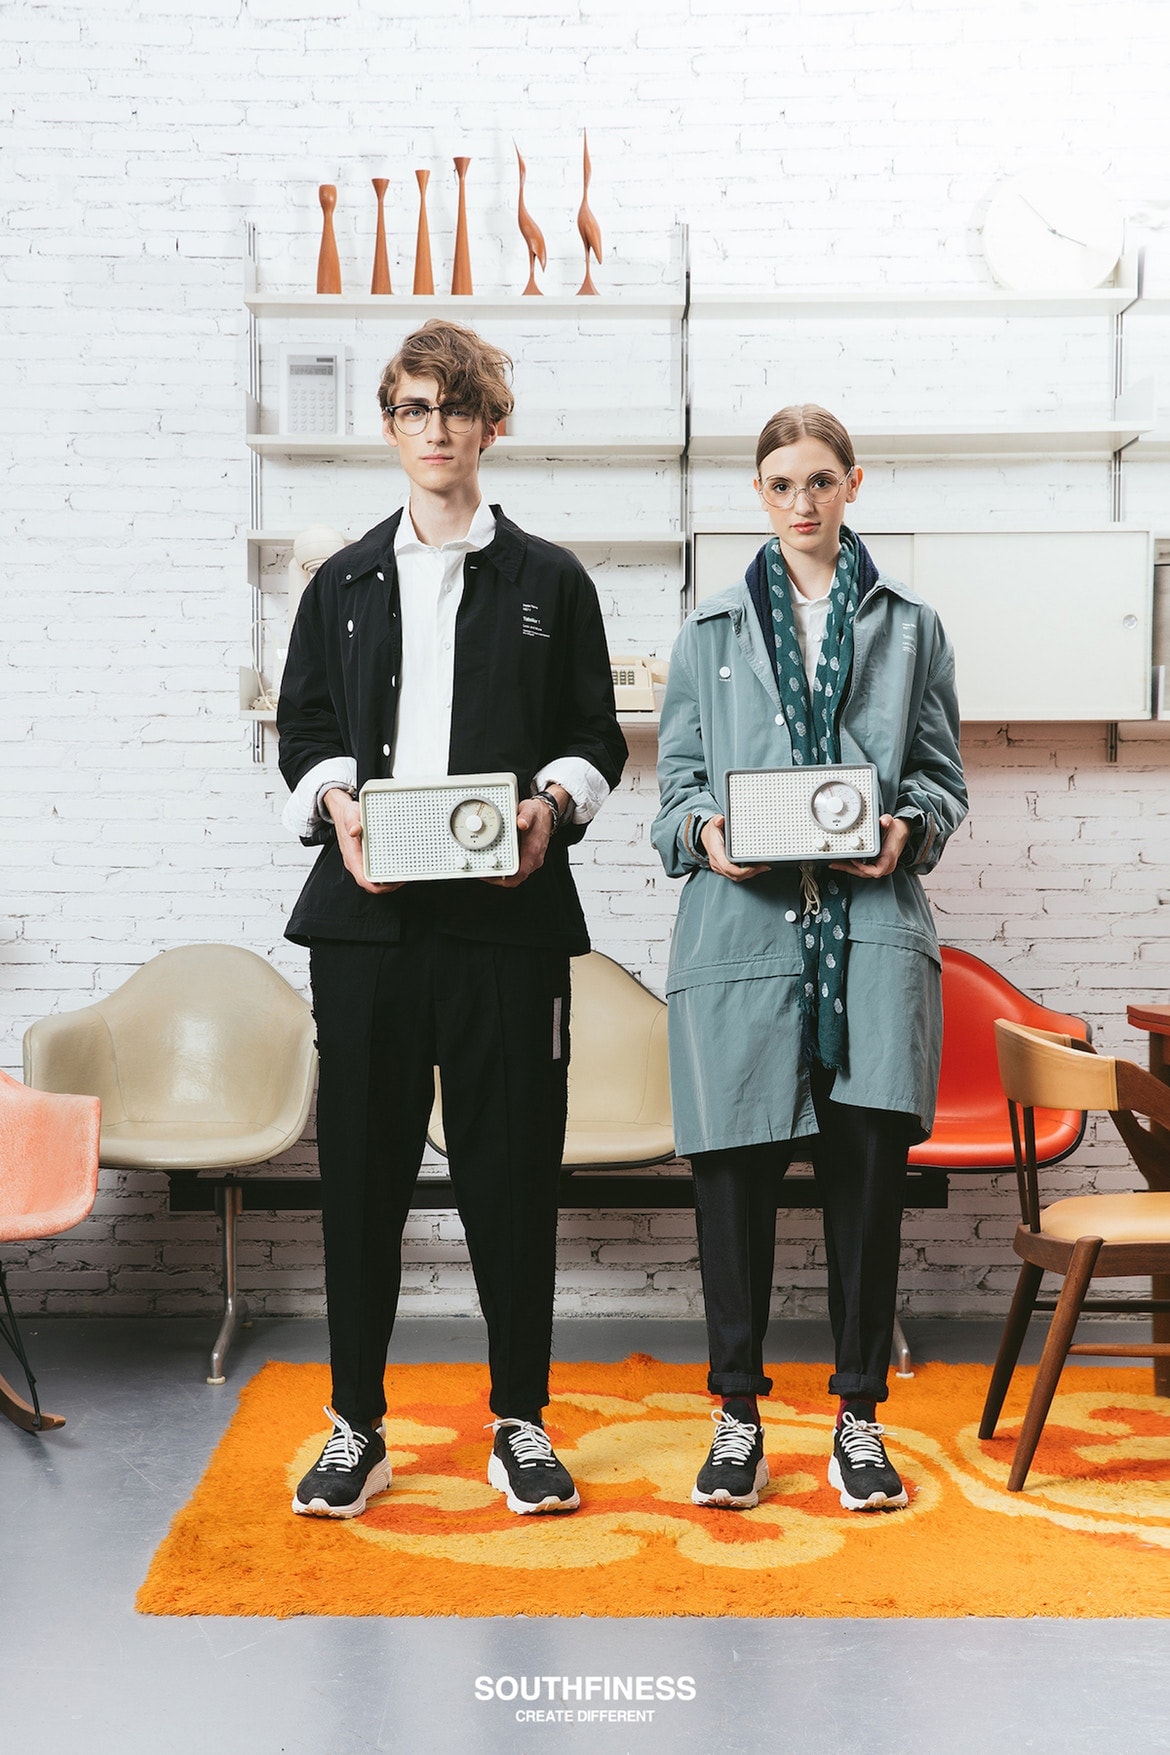 SOUTHFINESS 2017 Fall Winter DESIGNED TO MAKE A DIFFERENCE Collection Lookbook Dieter Rams Braun China Joy Division